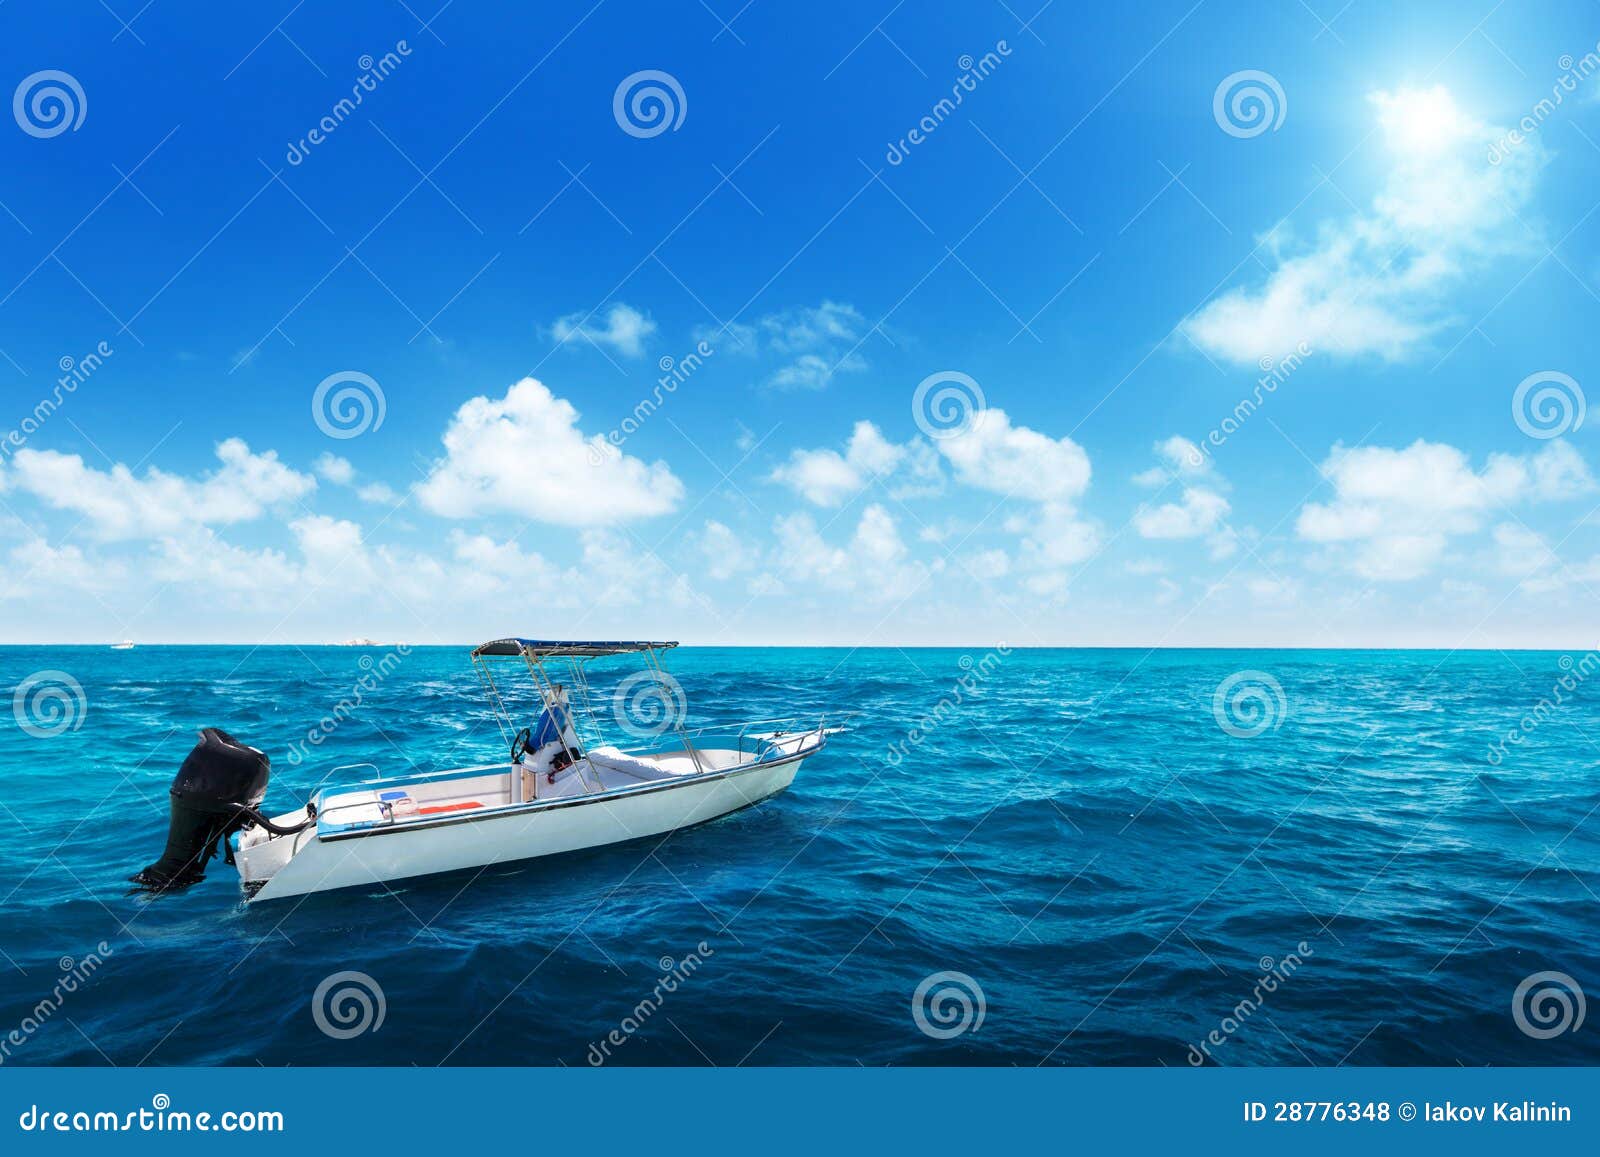 Speed Boat And Water Of Ocean Royalty Free Stock Photos - Image 